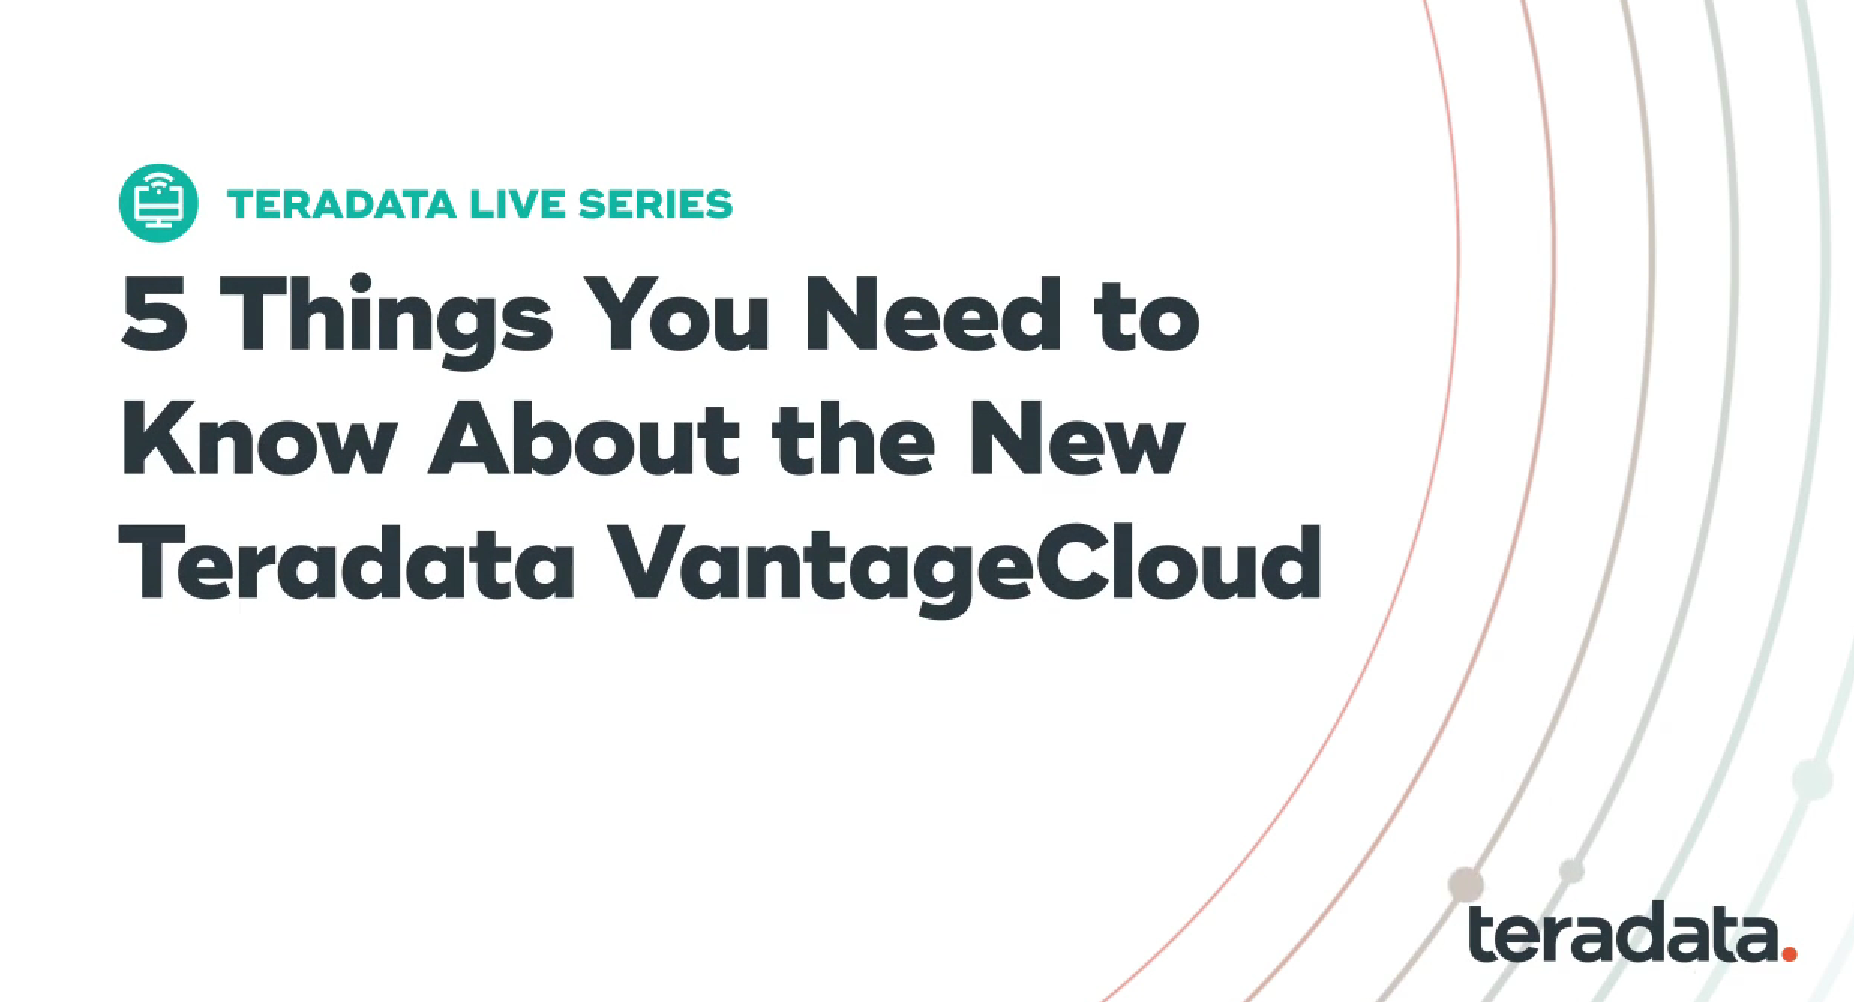 Five things you need to know about the new Teradata VantageCloud